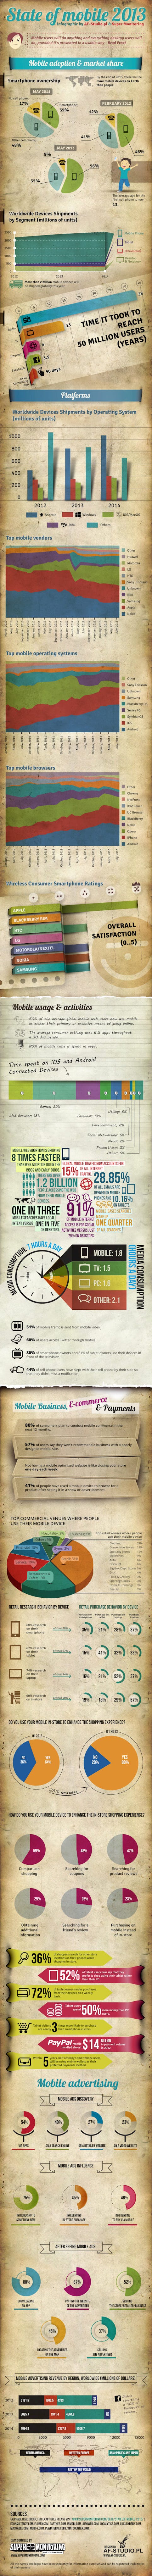 Infographic-2013-Mobile-Growth-Statistics-Large